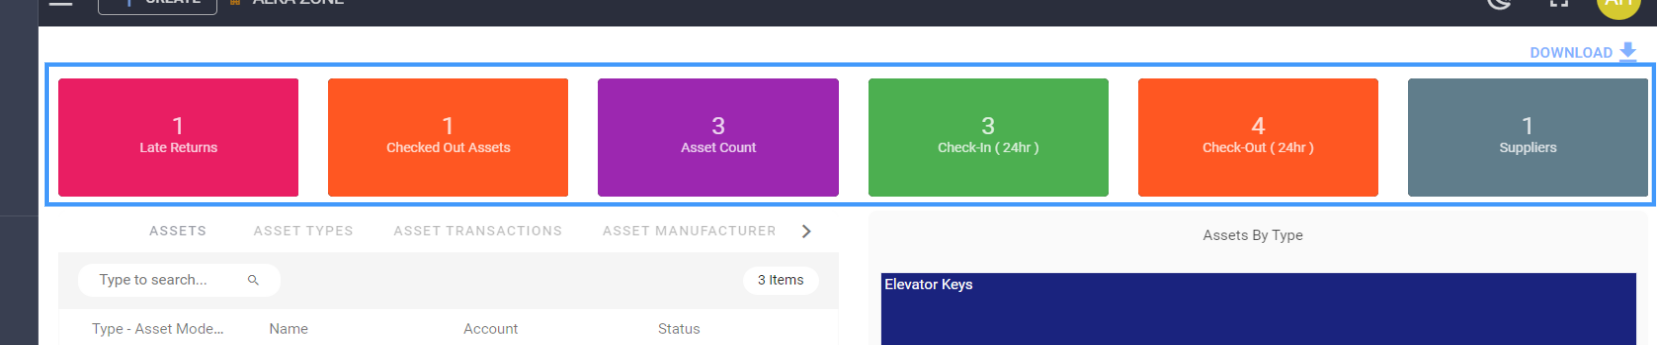 guarding_suite-asset_tracking-dashboard.png